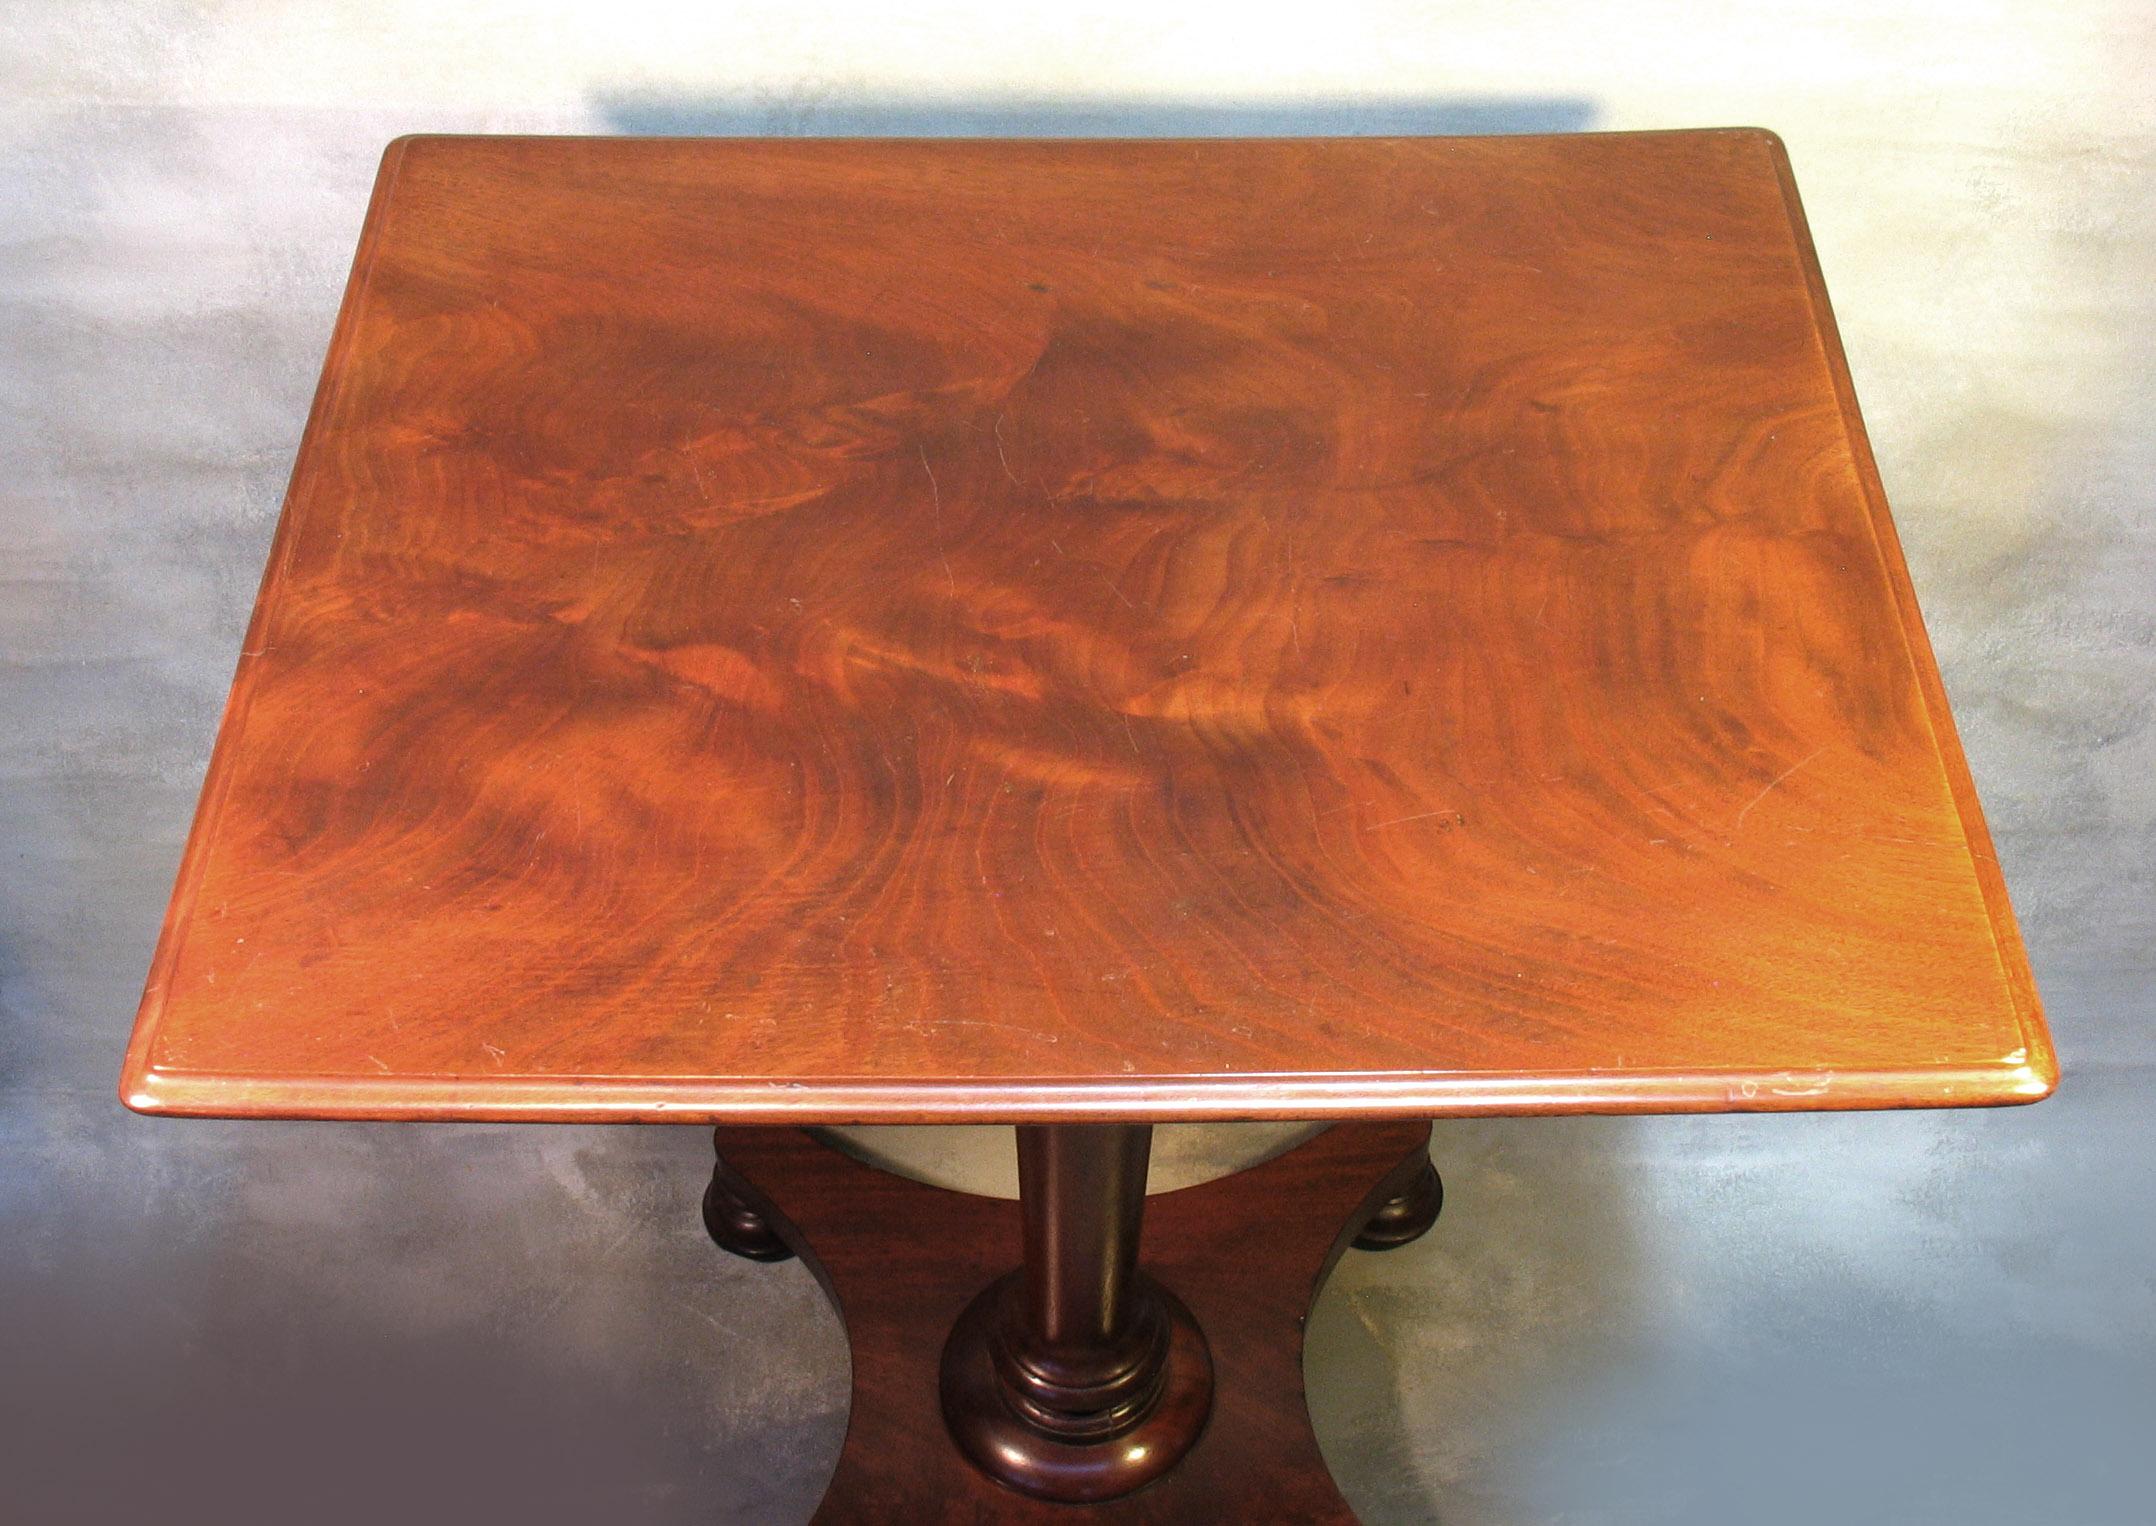 Hand-Crafted William IV Mahogany Occasional Table circa 1830 with George III Mahogany Tray For Sale